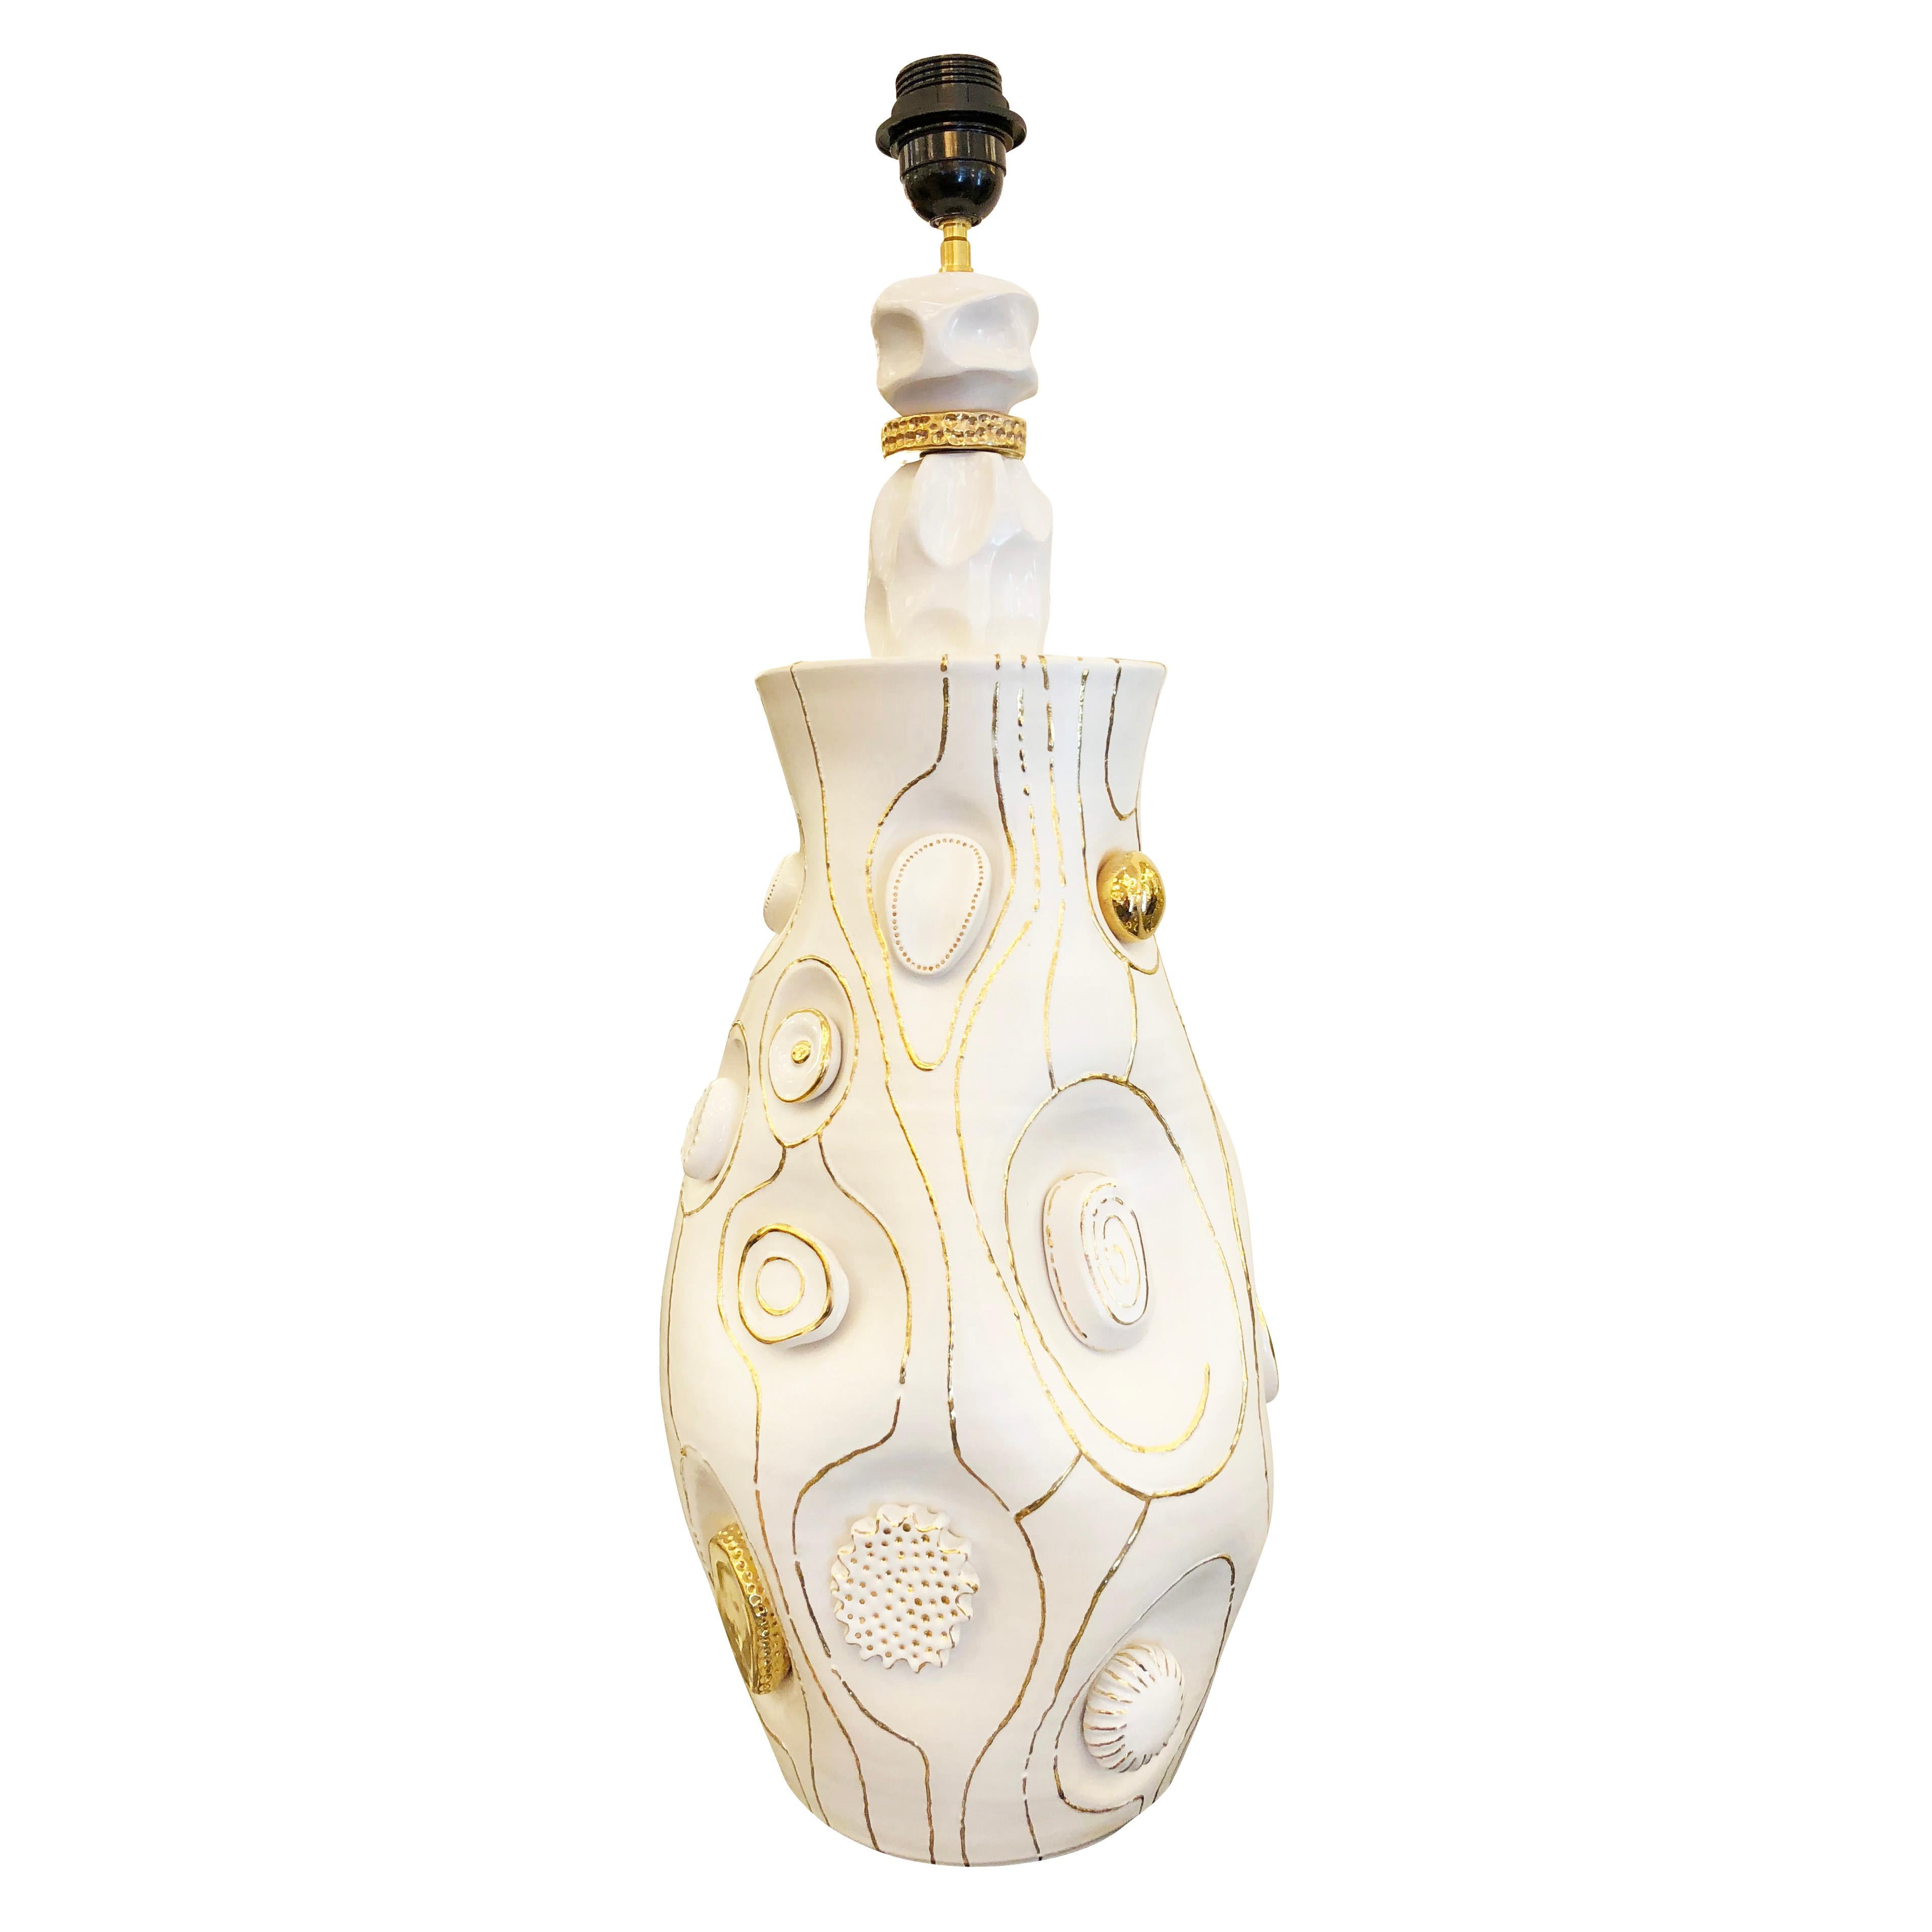 Handmade table lamp by contemporary, Paris based ceramicist, Veronique Rivemale. The organic white body is decorated with irregular medallions and gold lines. 

Measures: Diameter 10”

Height 26”.

 